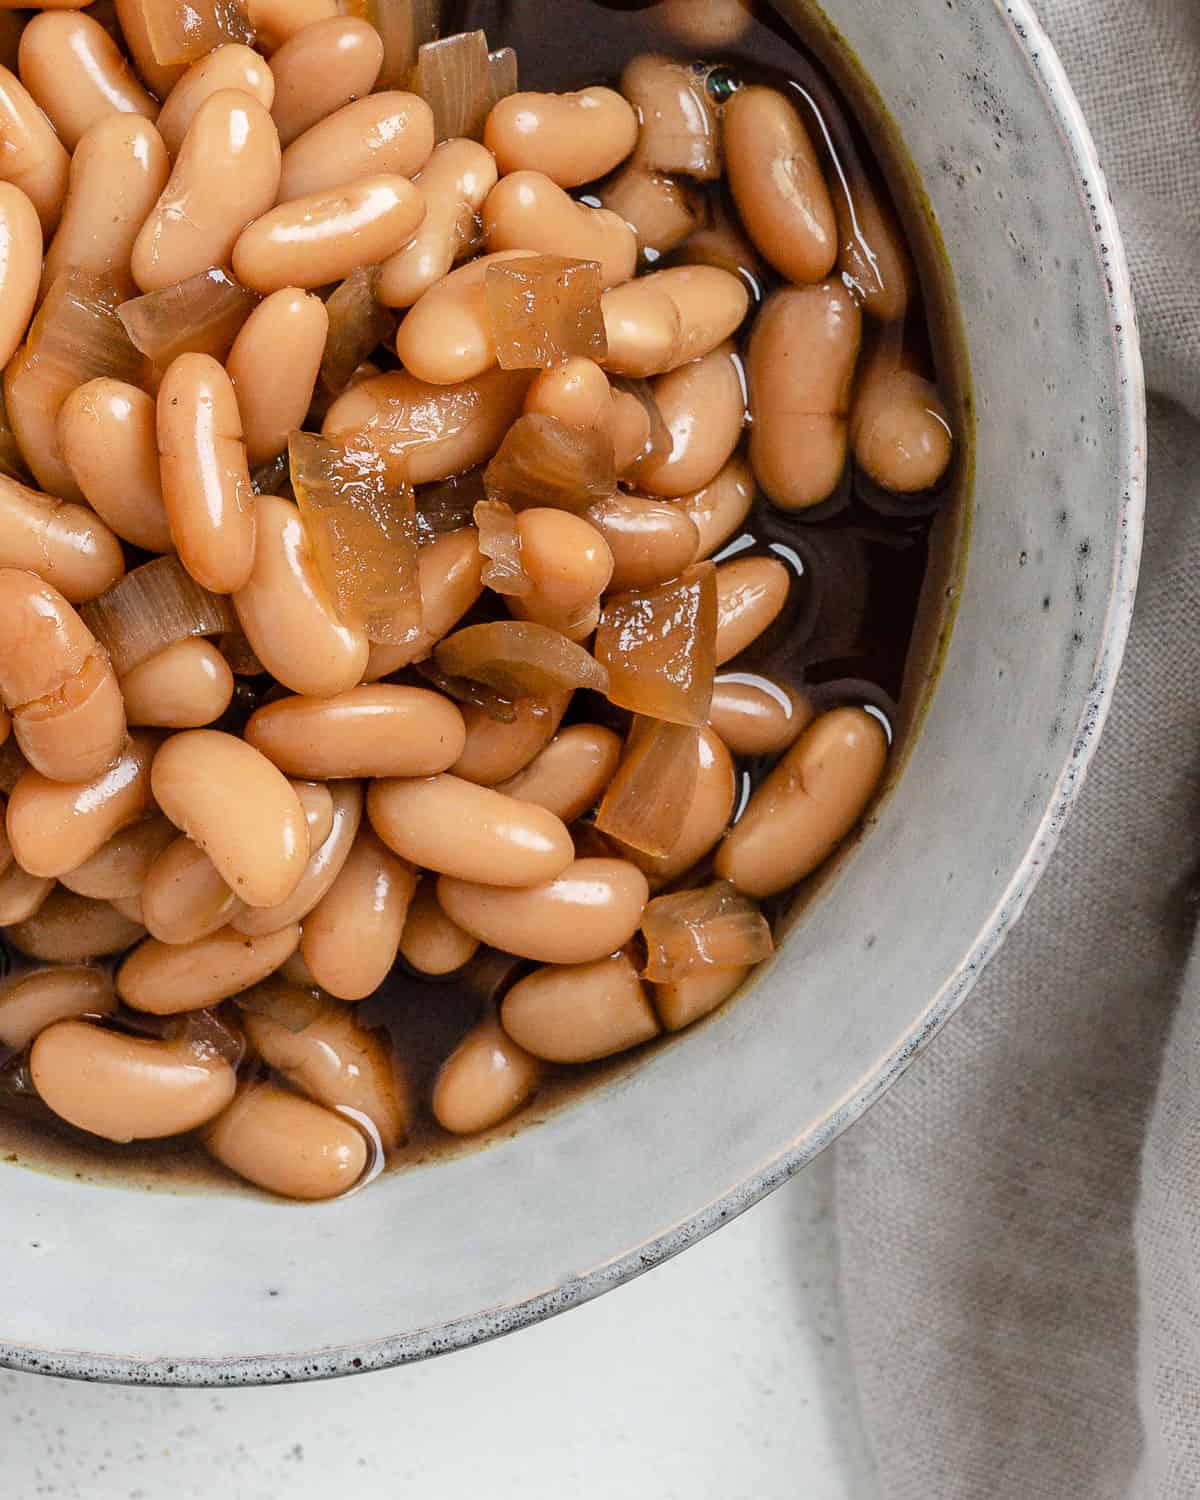 completed Vegan Slow Cooker Baked Beans in a white bowl against a white background